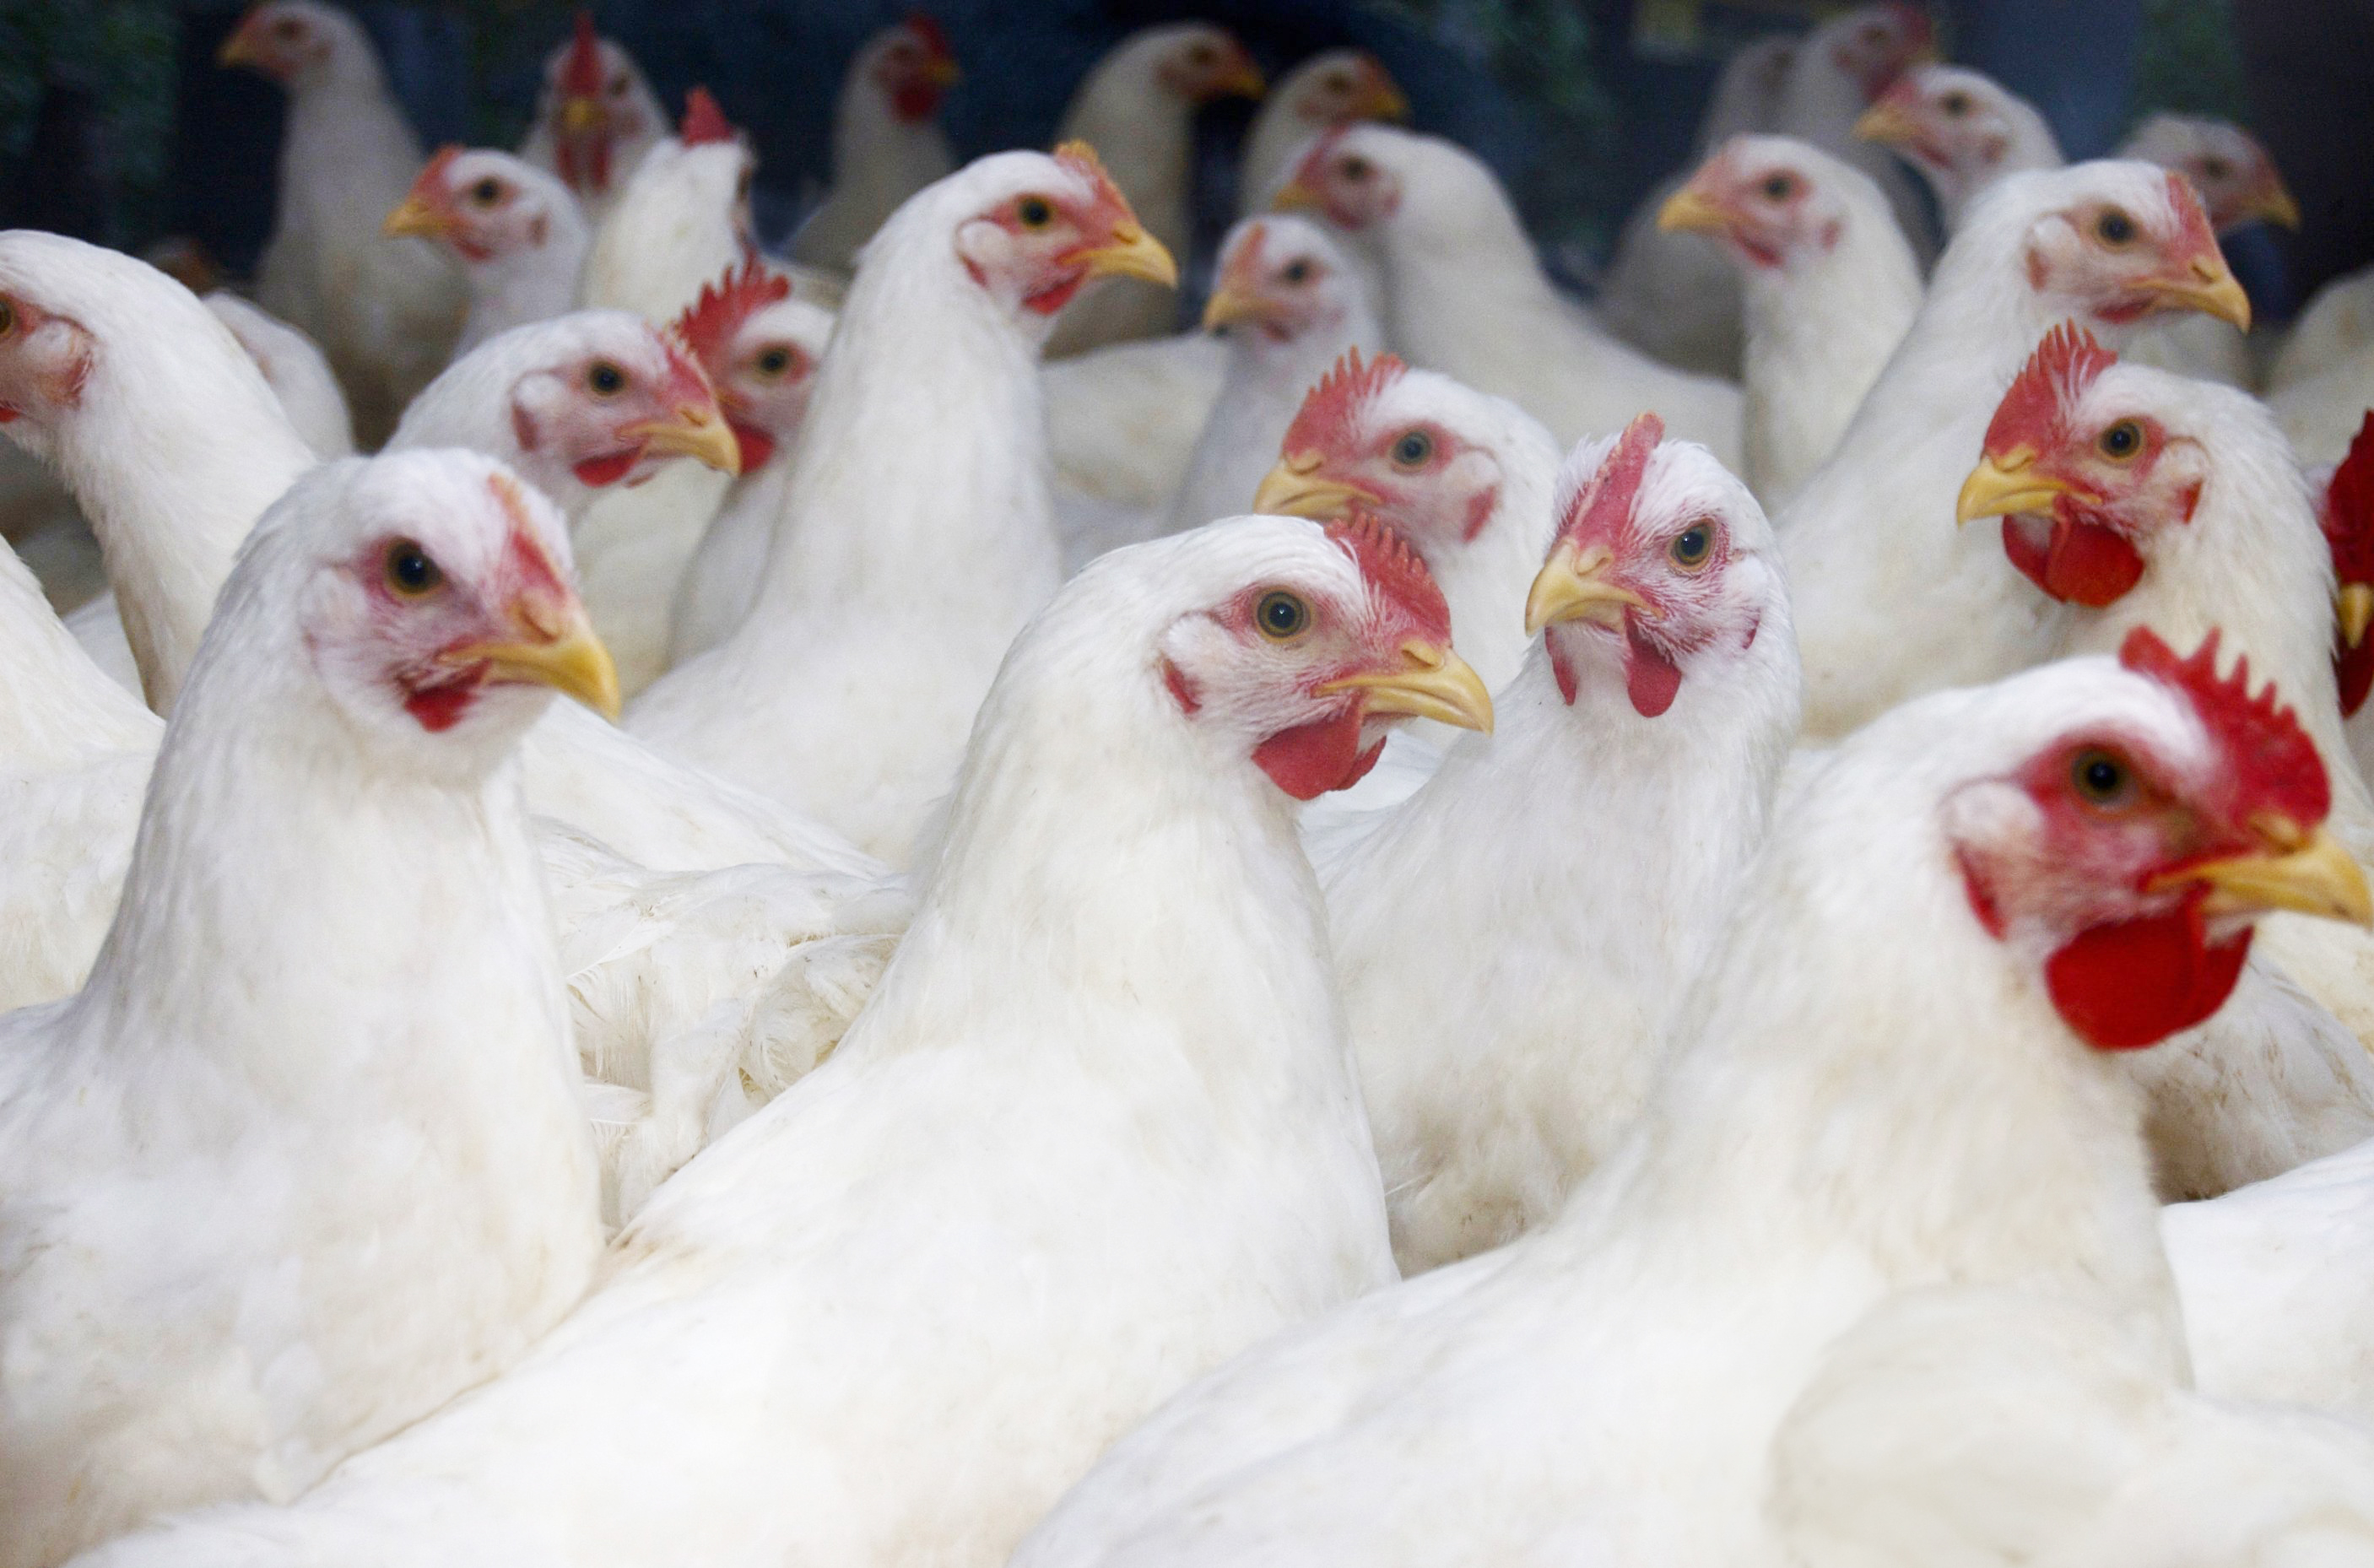 Saudi Arabia offers 15 investment opportunities for poultry projects in Al Madinah